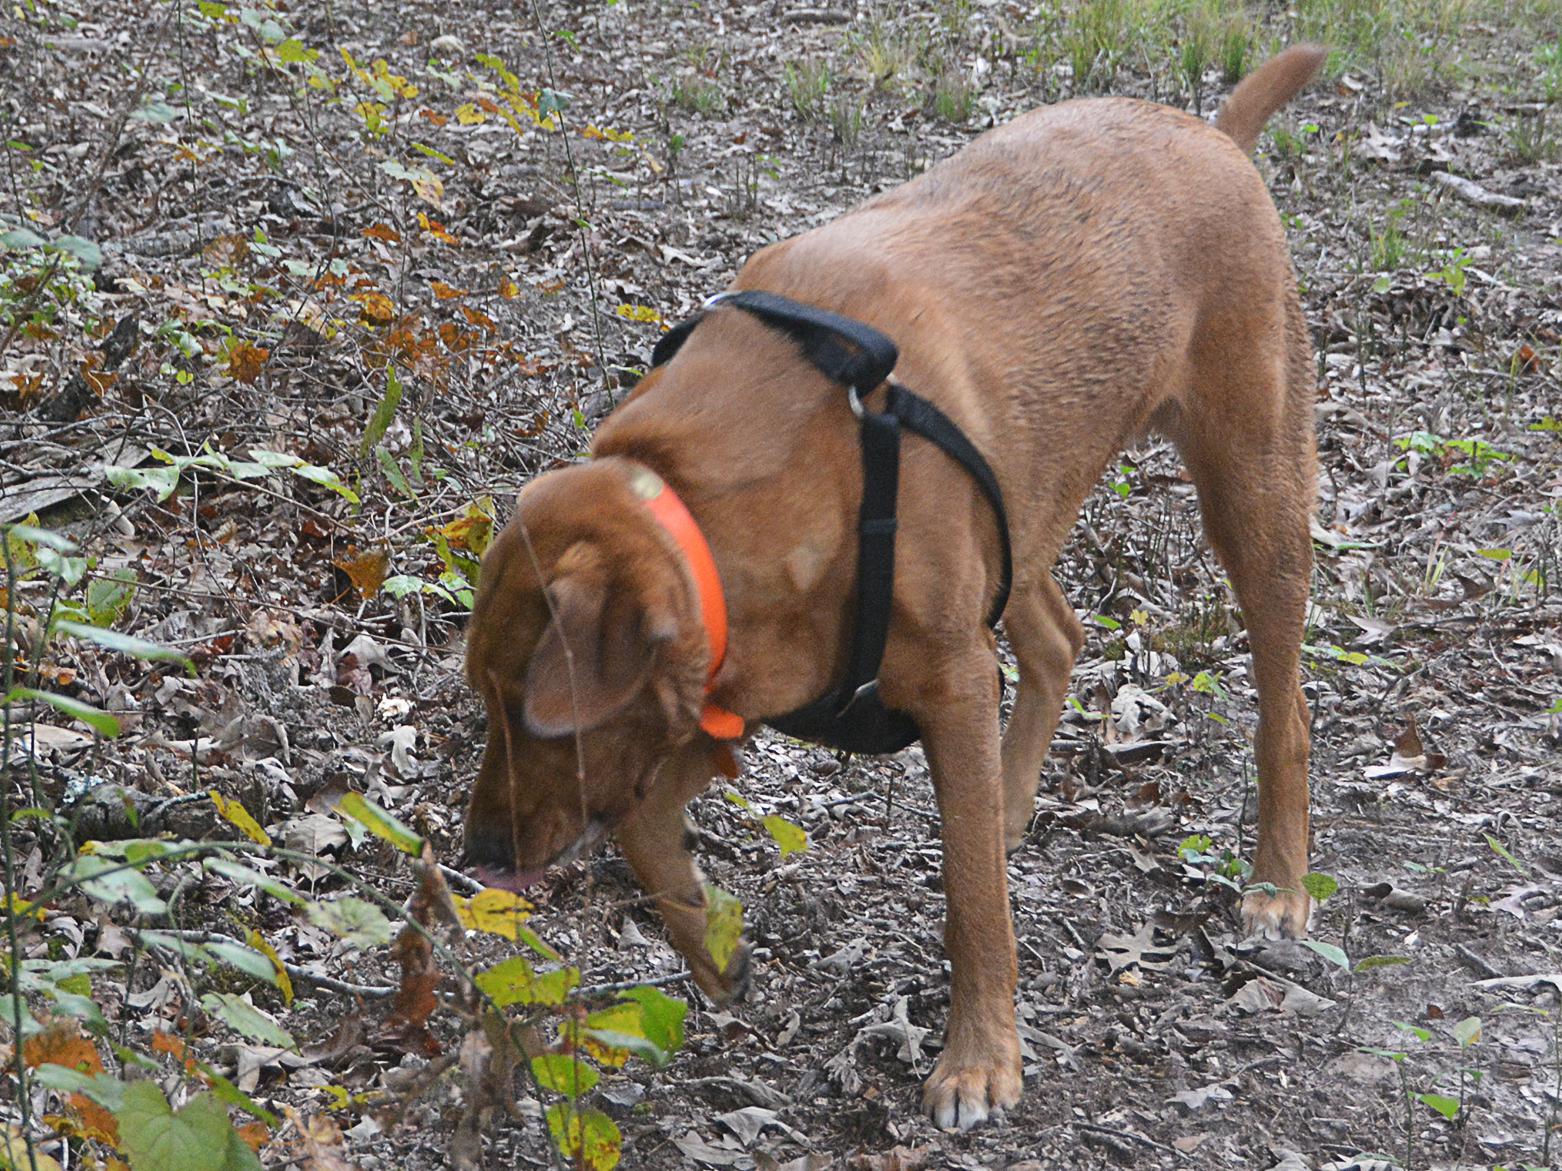 Large, reddish-brown dog wearing a shoulder harness sniffs the ground in a wooded area.